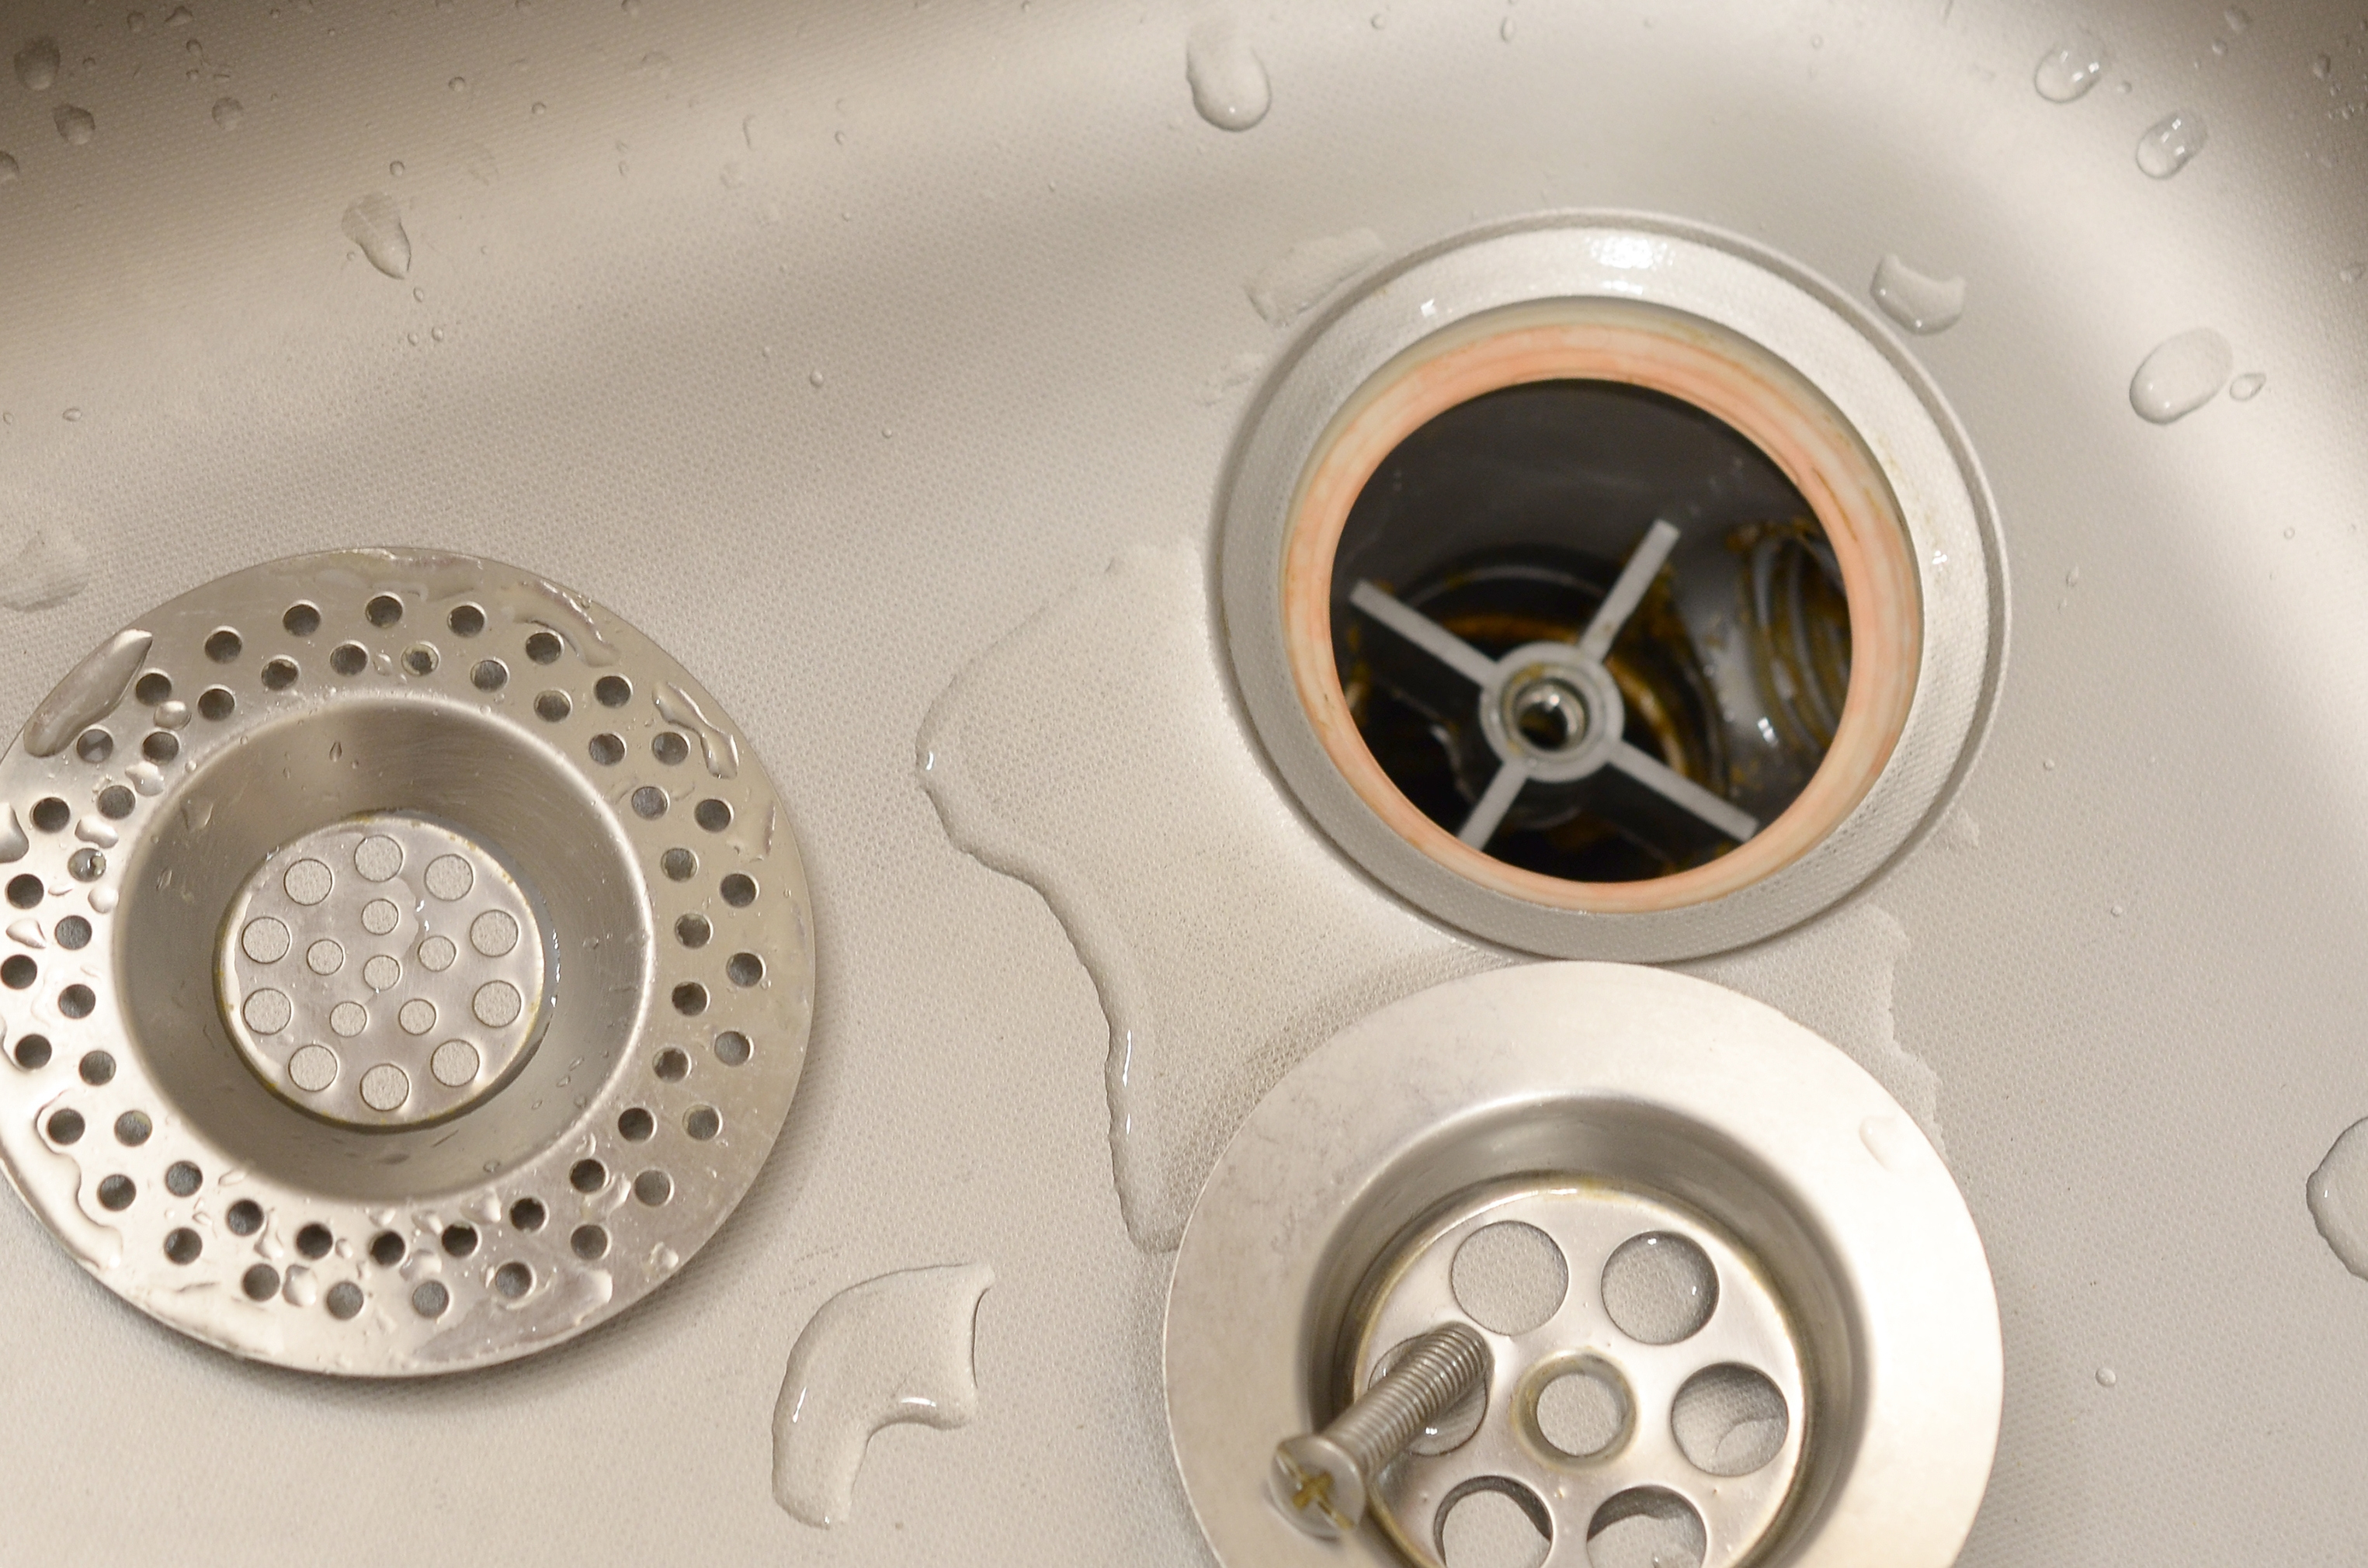 Close-up of a kitchen sink with visible water droplets, focusing on the drain and garbage disposal